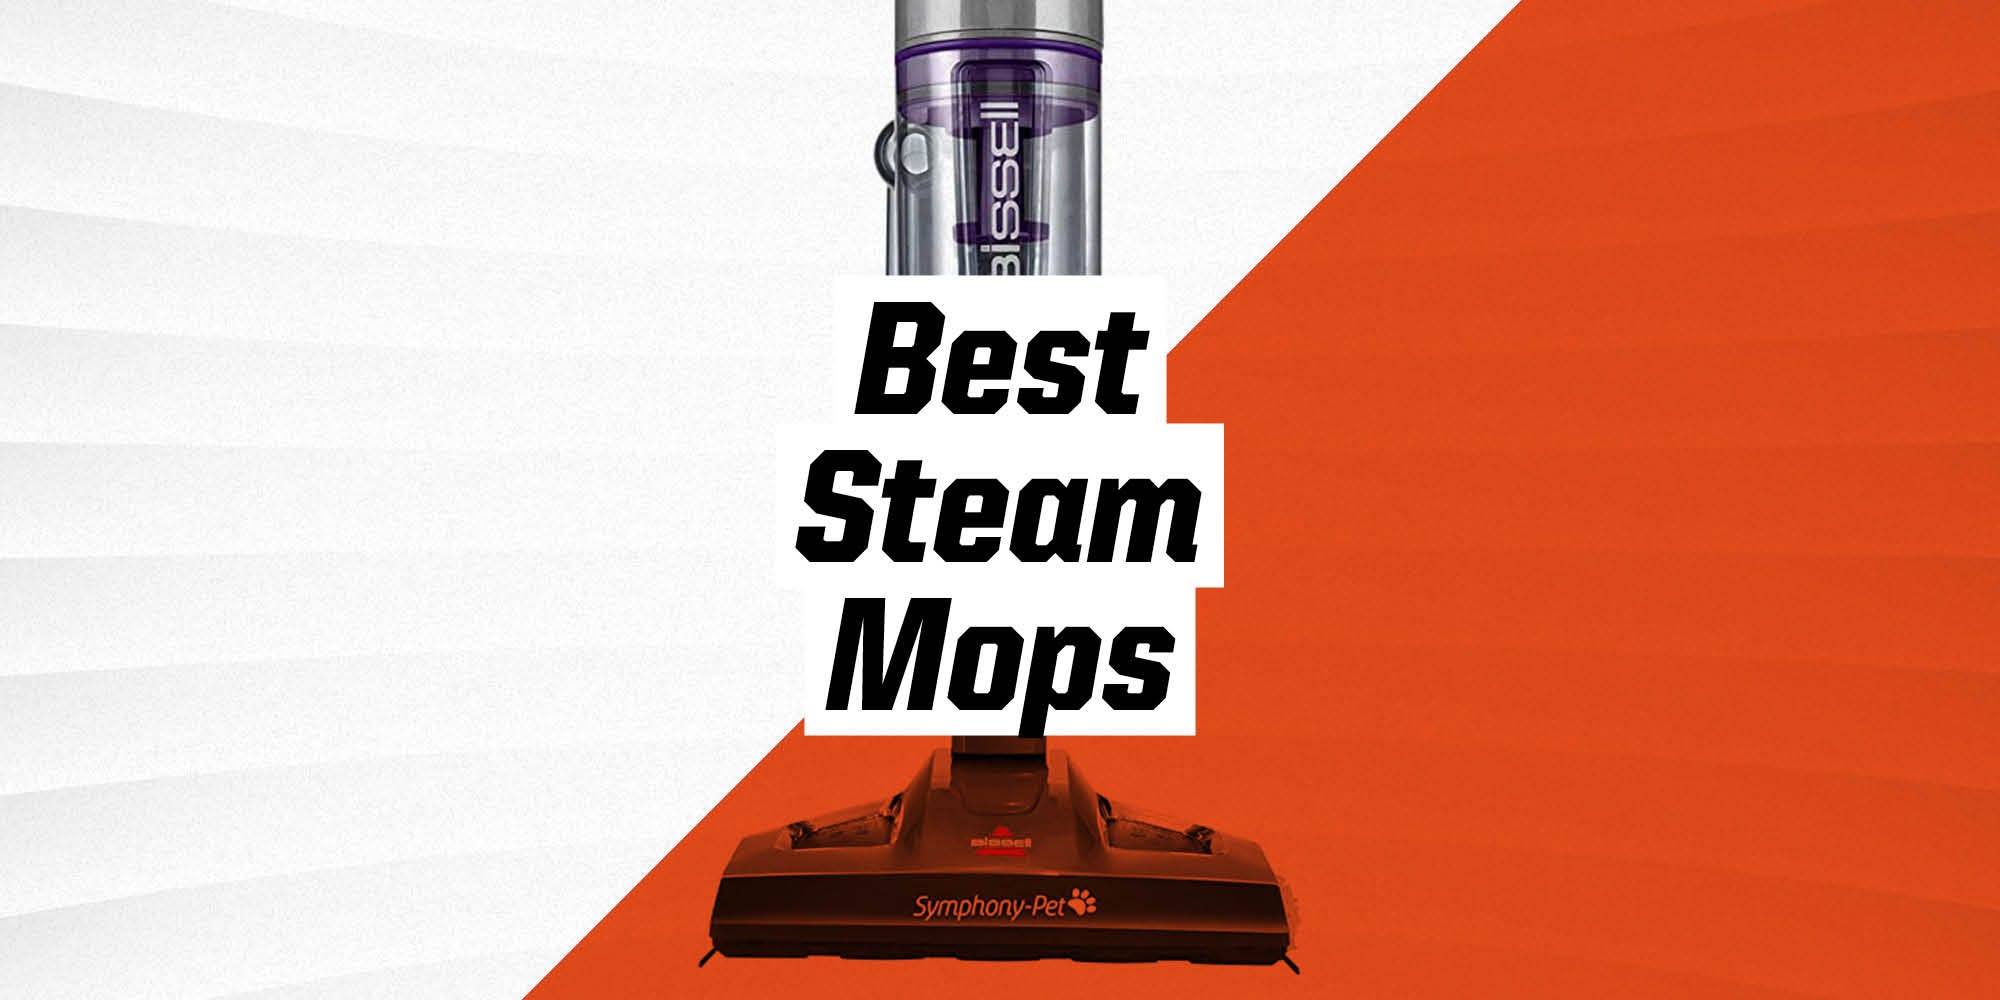 These 10 Highly Rated Steam Mops Blast Through Grime Without Chemicals